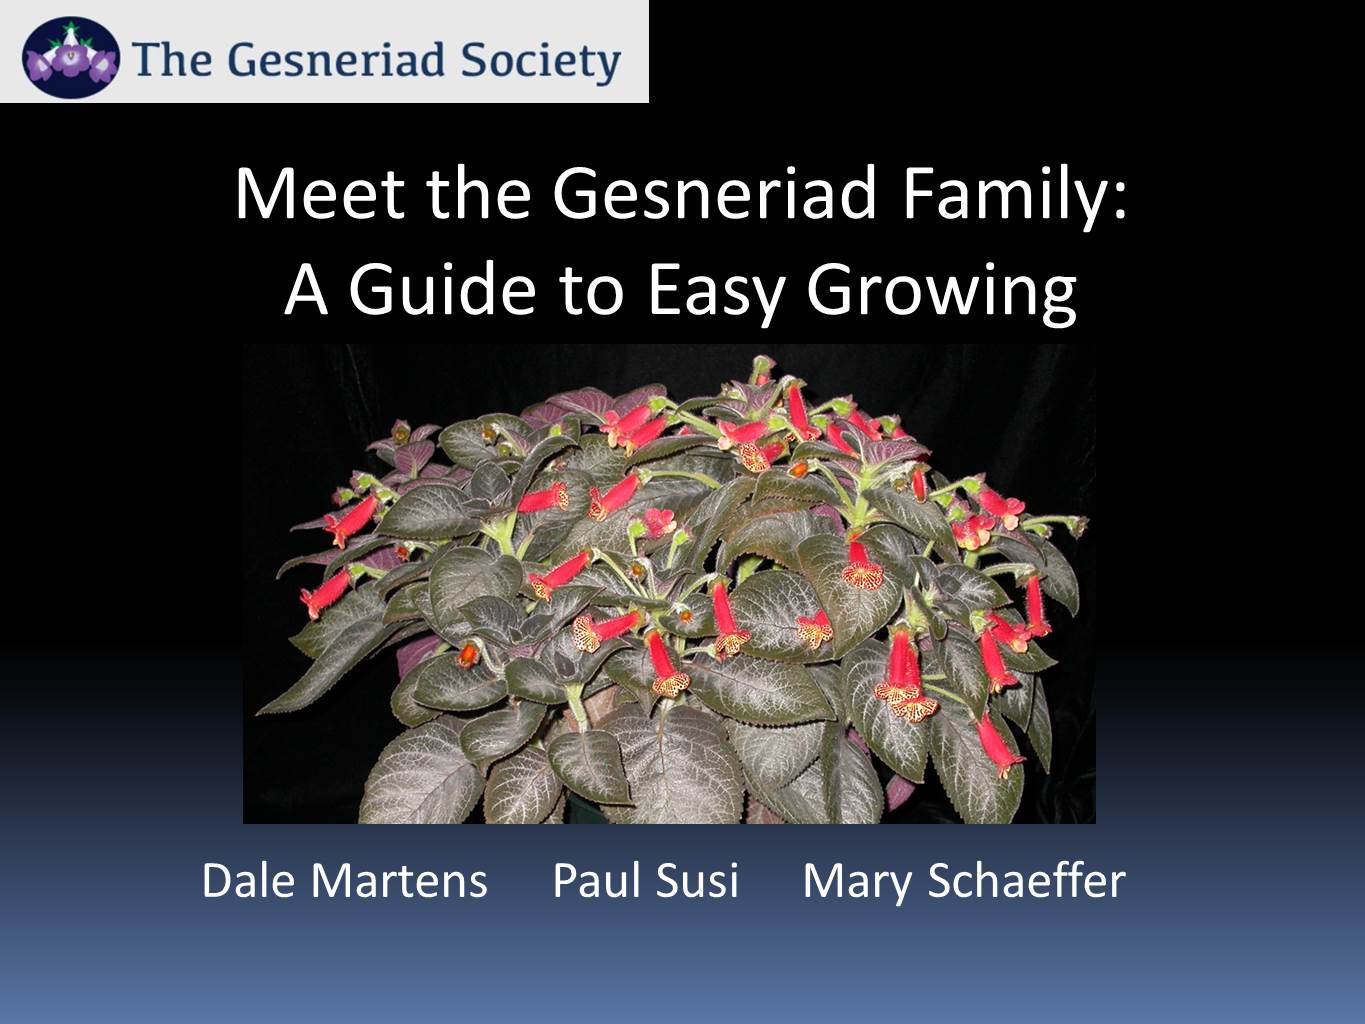 Webinar: Meet the Gesneriad Family - A Guide to Easy Growing (Free Download)*